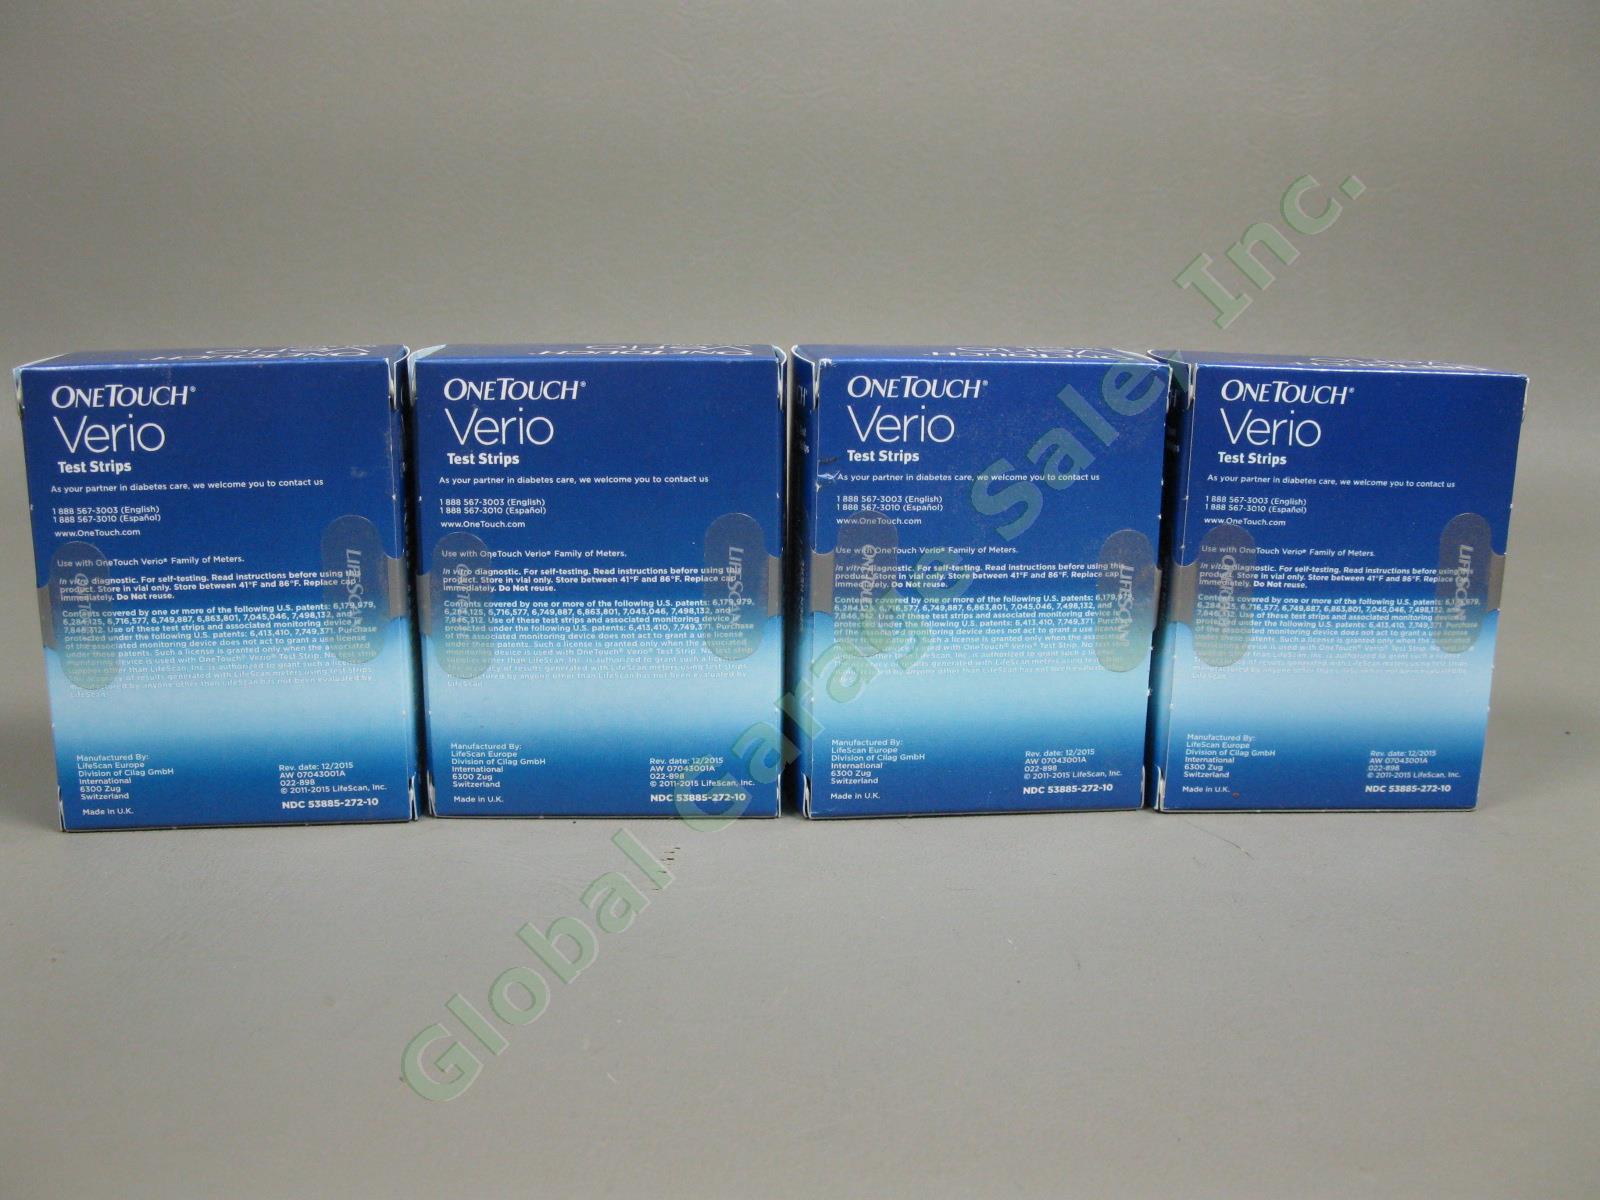 1100 NEW OneTouch Verio Diabetic Glucose Test Strips Sealed Lot Exp 2018-2019 NR 11